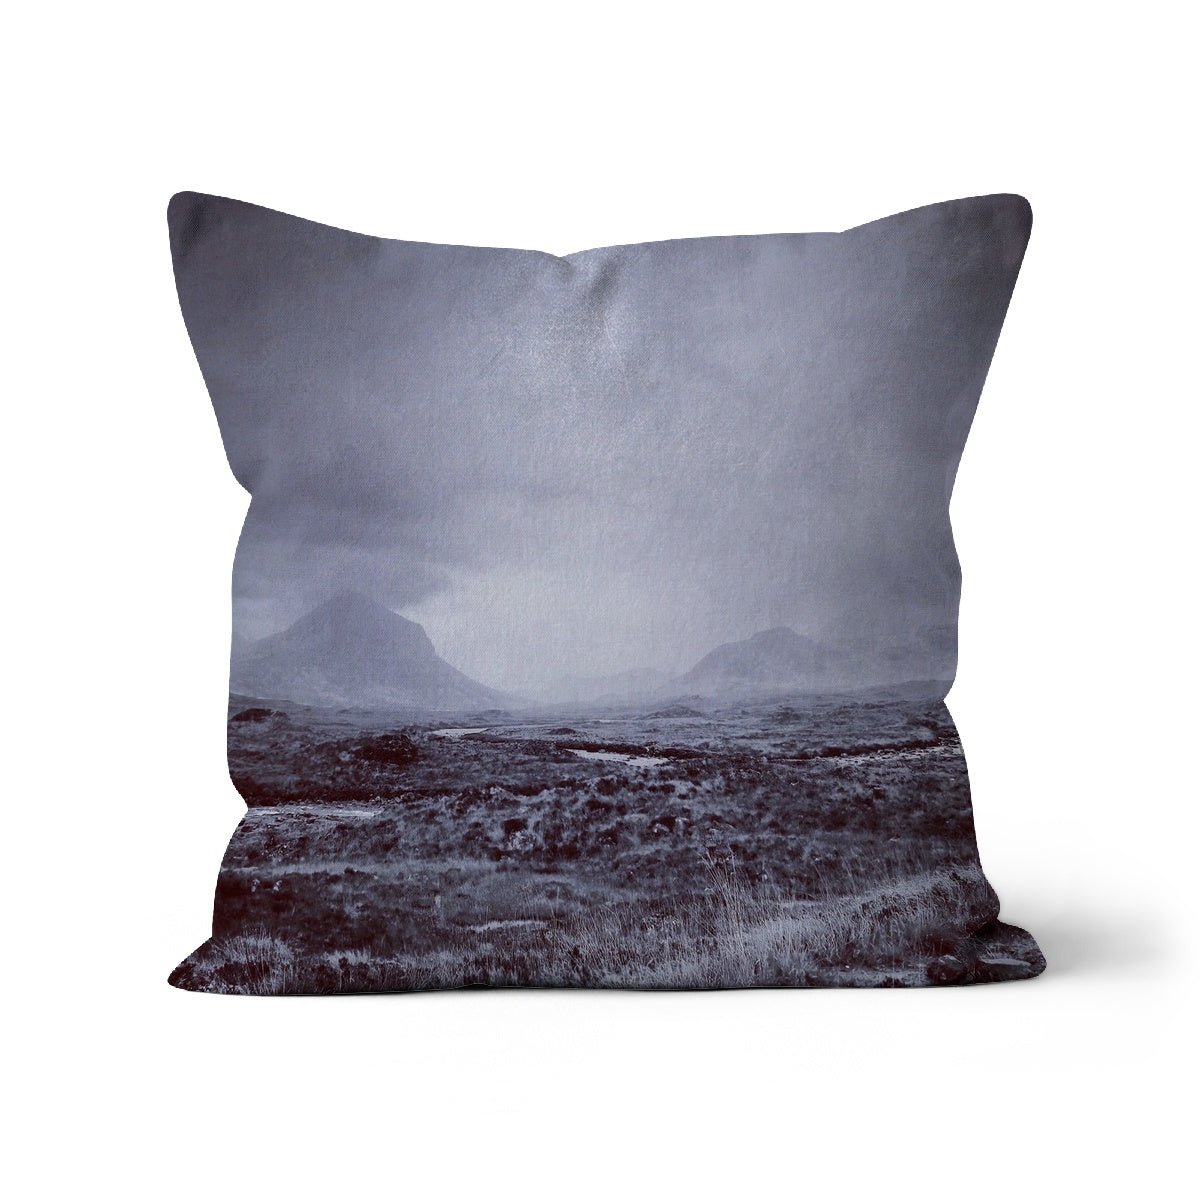 The Brooding Cuillin Skye Art Gifts Cushion-Cushions-Skye Art Gallery-Linen-18"x18"-Paintings, Prints, Homeware, Art Gifts From Scotland By Scottish Artist Kevin Hunter